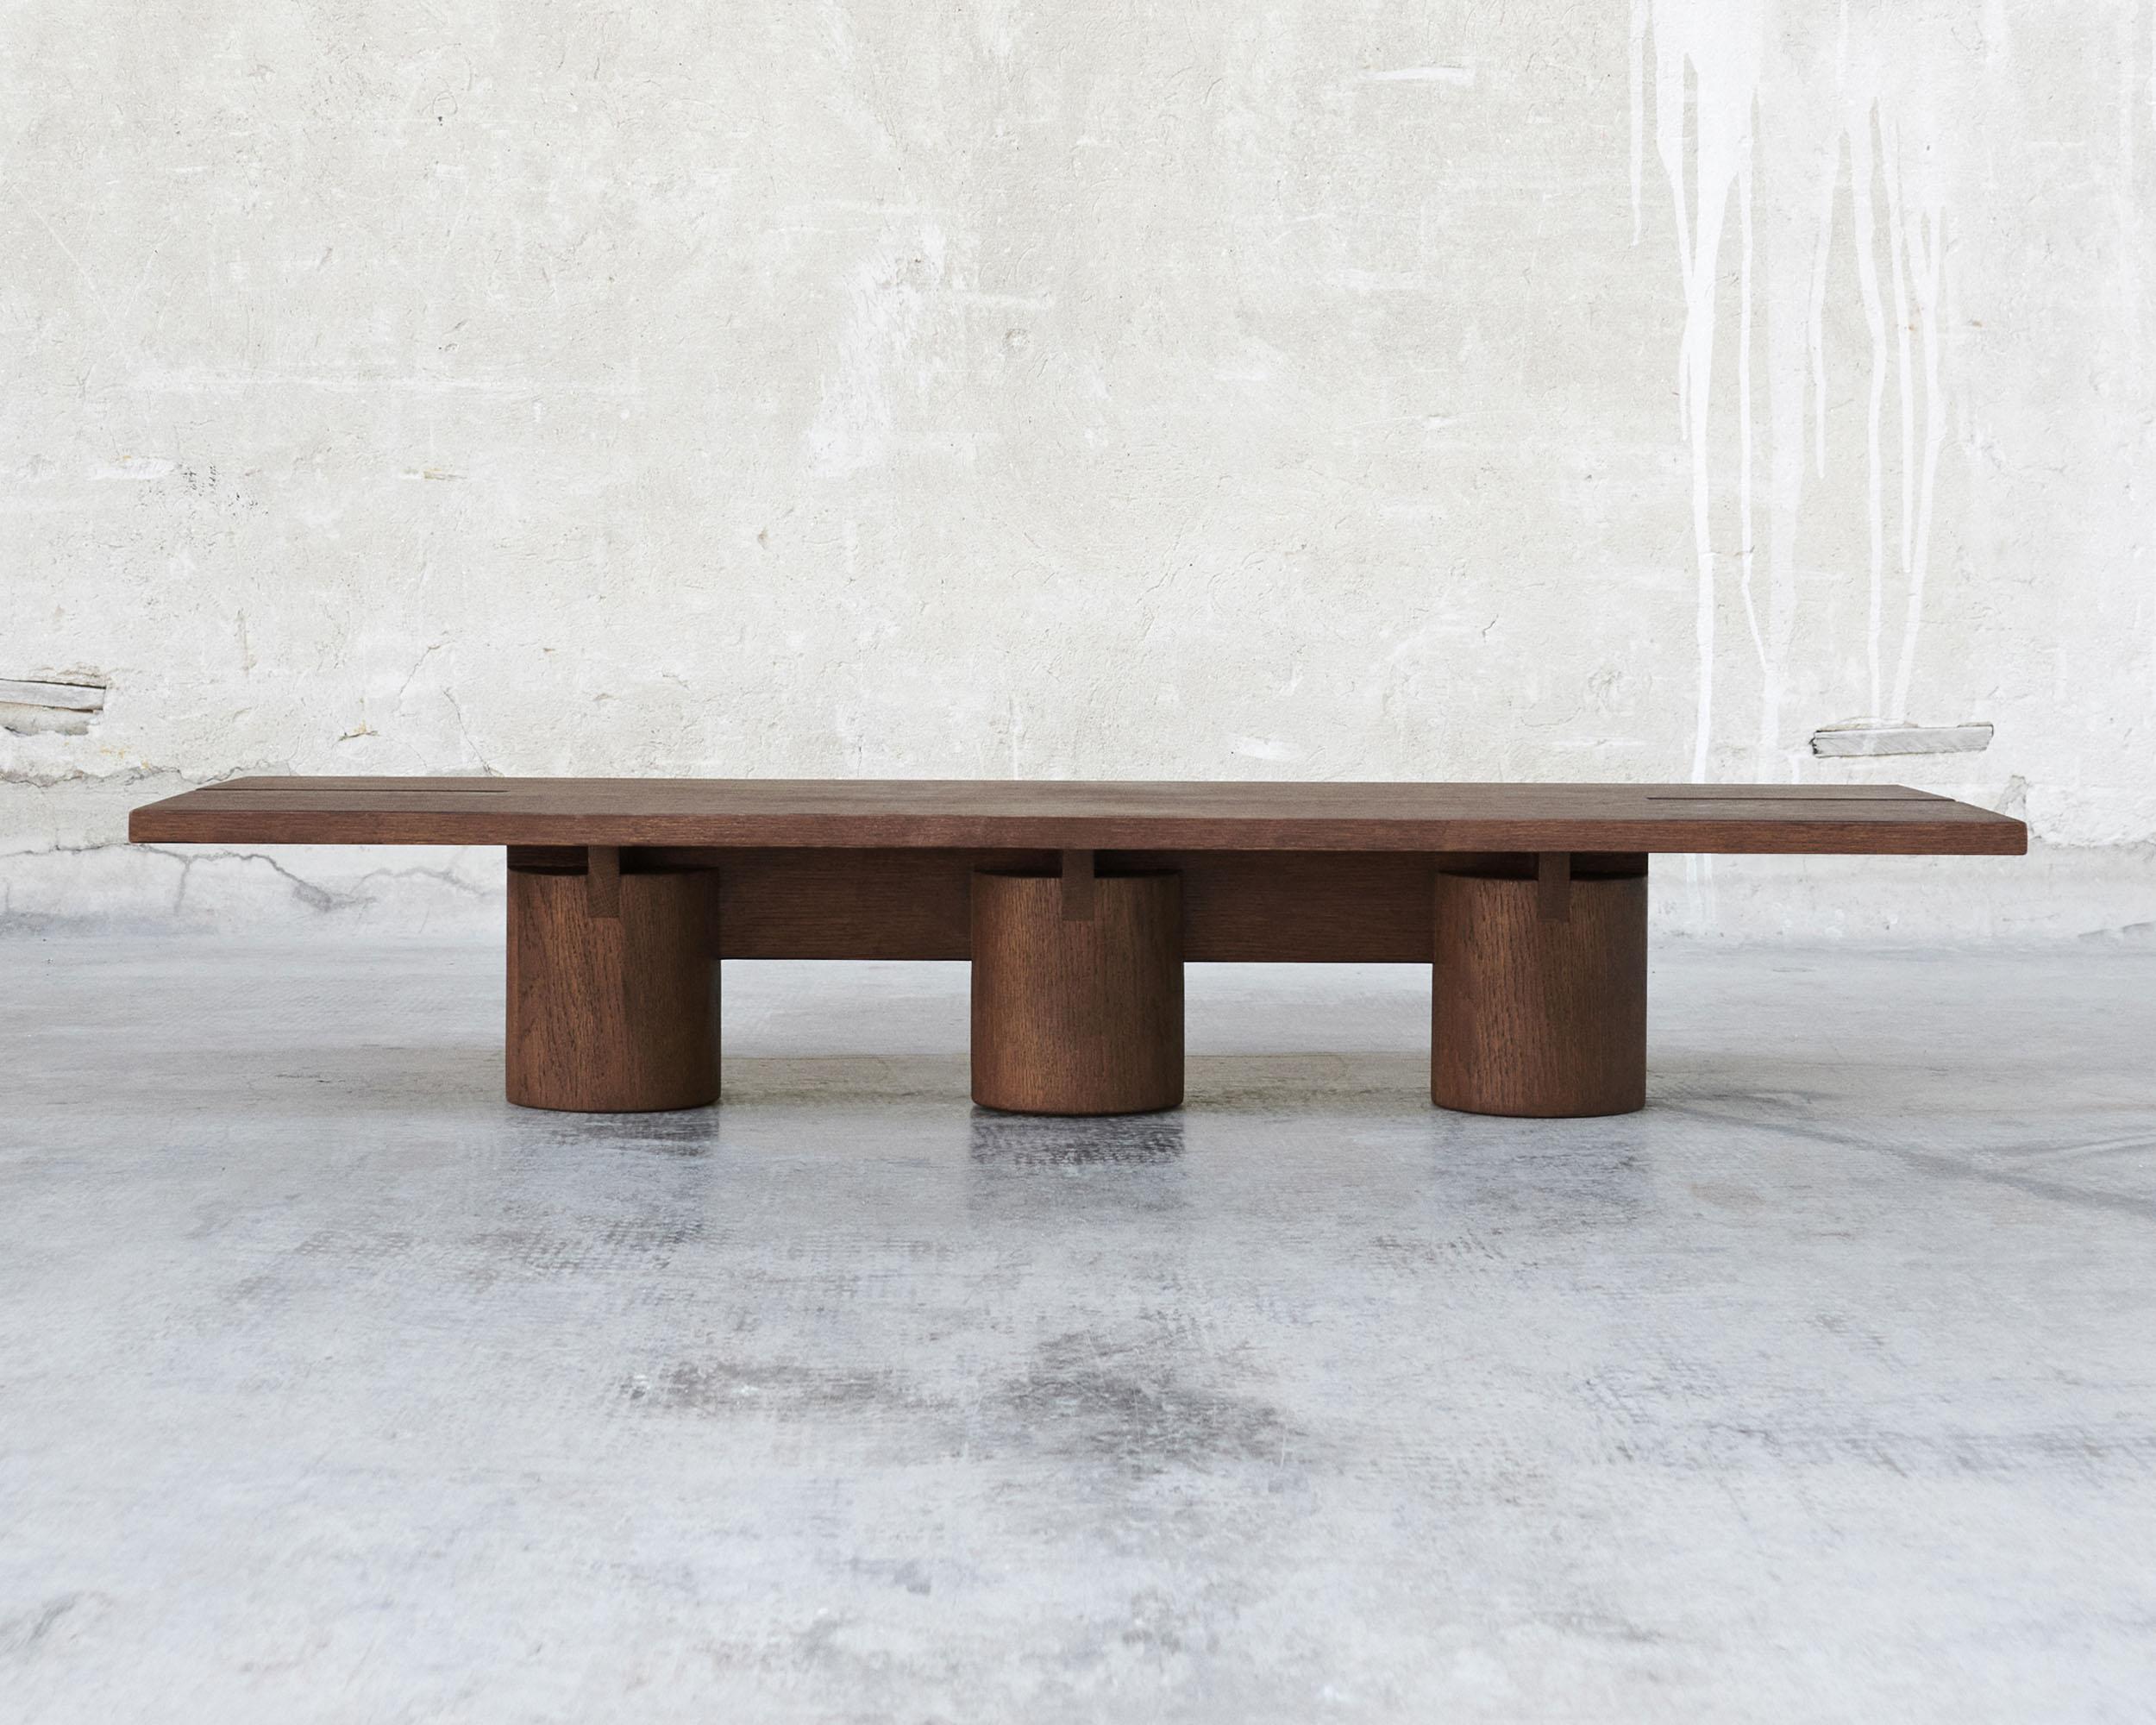 NLM Coffee Table by Fora Projects 
Designed by Nikolaj Lorentz Mentze (Studio 0405)

Model shown: Dark brown
Brown surface treatment with non-toxic hardwax oil

Dimensions:

H: 25, L: 144, W: 48.5 cm

Customizable

_______________

The NLM coffee